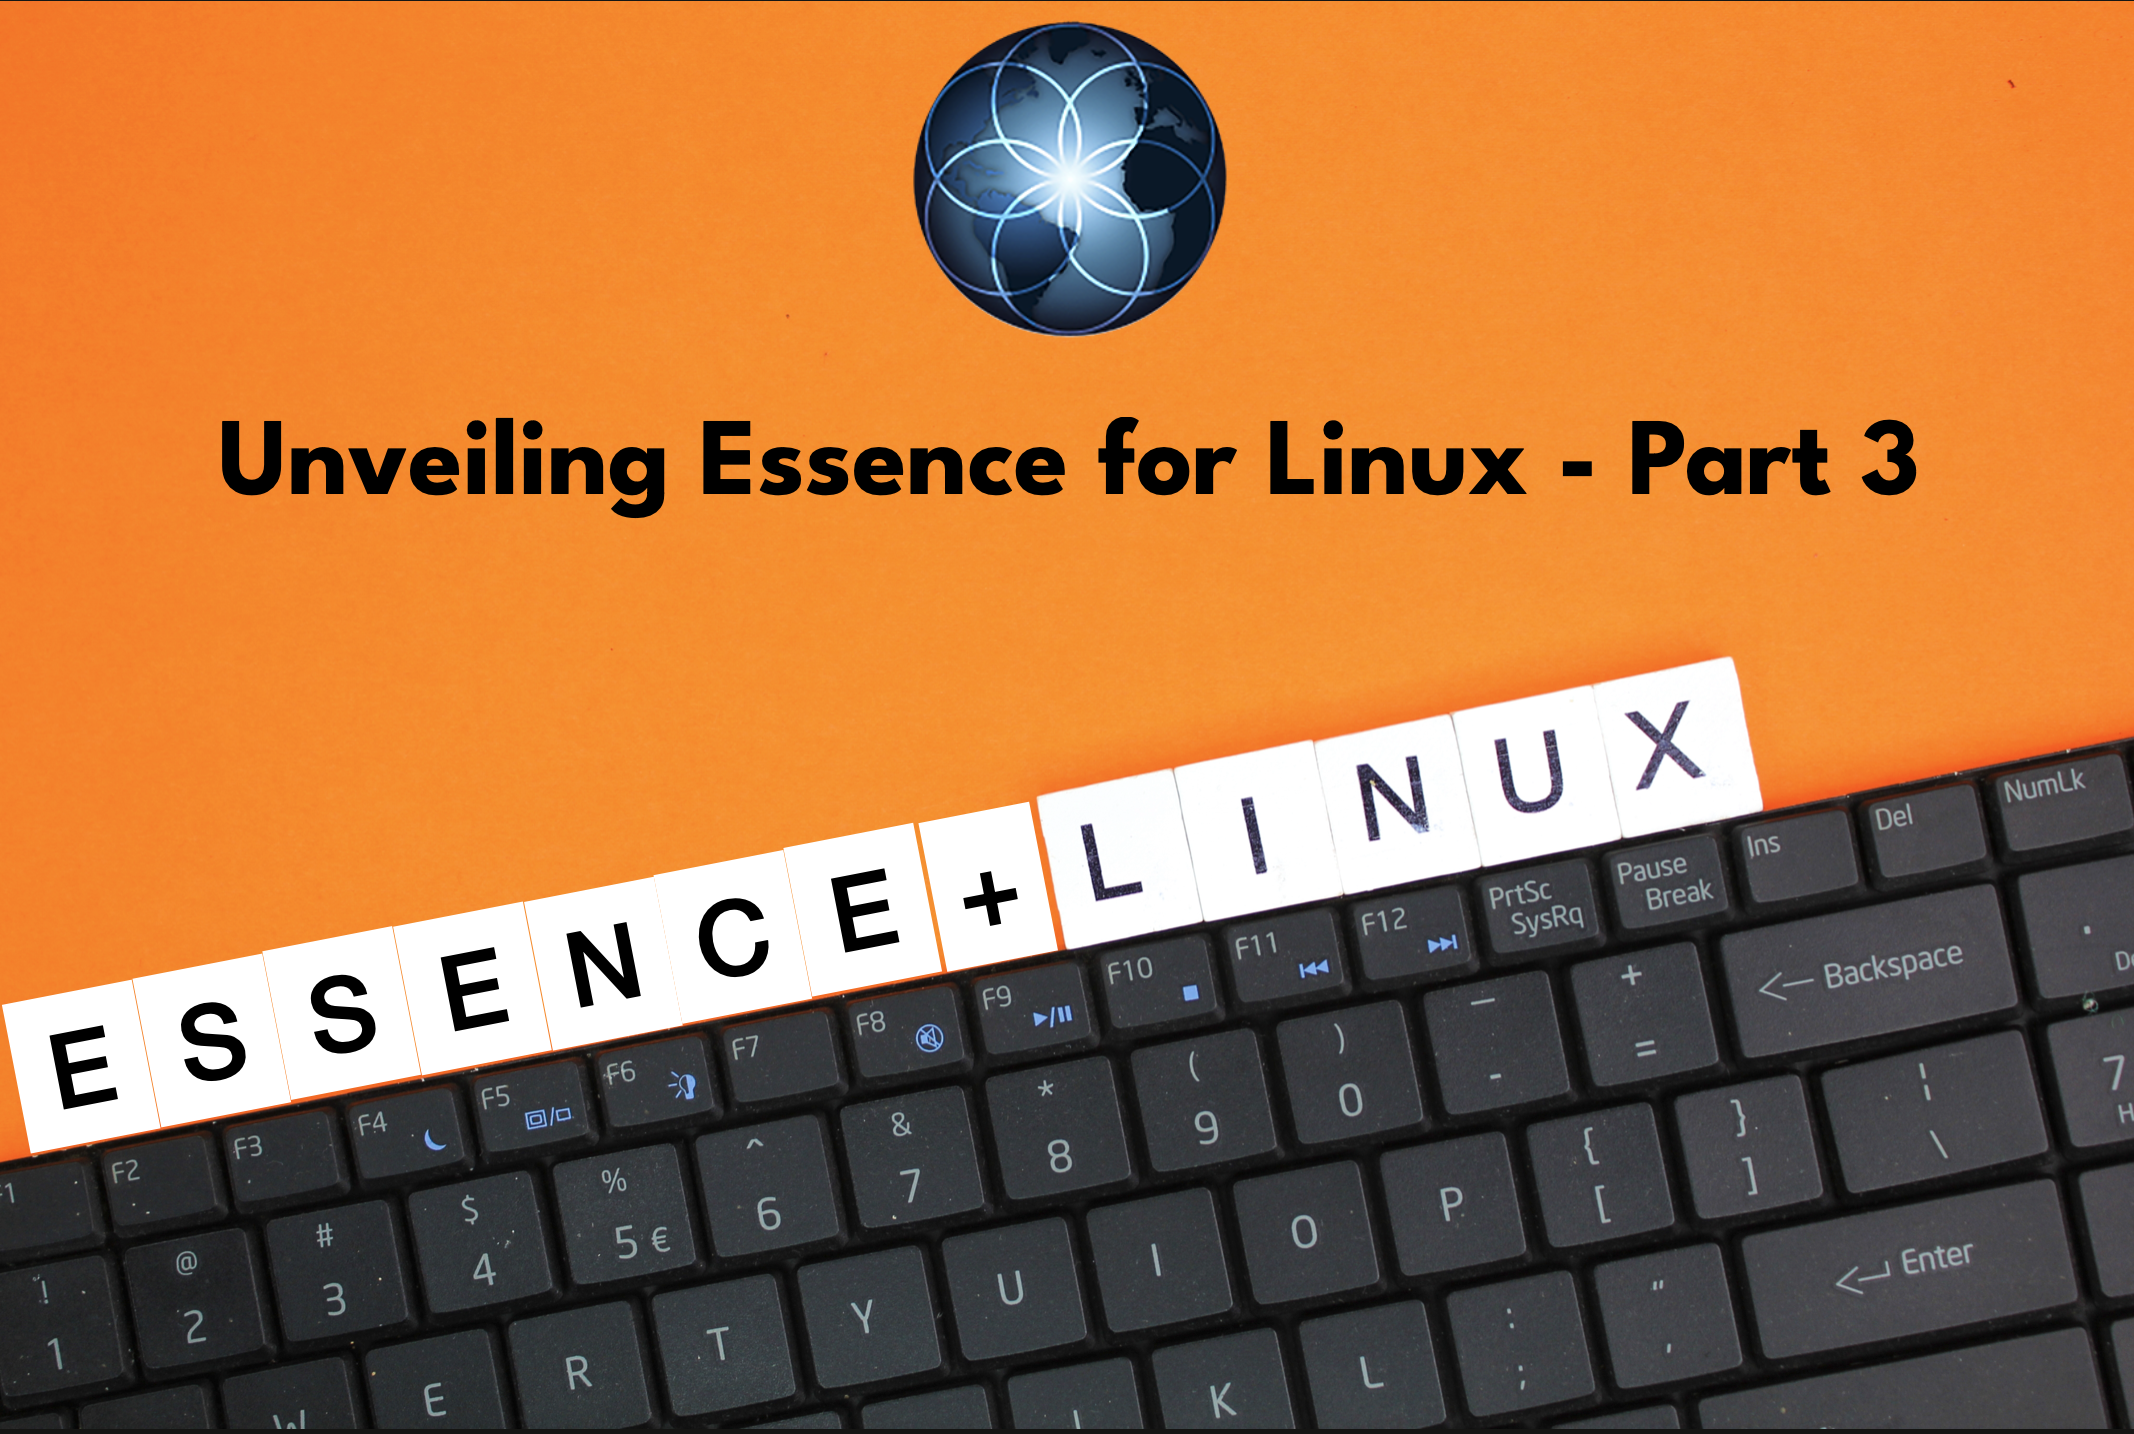 A graphic with letters cut out in paper that say Essence + Linux placed over the top of a keyboard. The Essence logo is at the top.